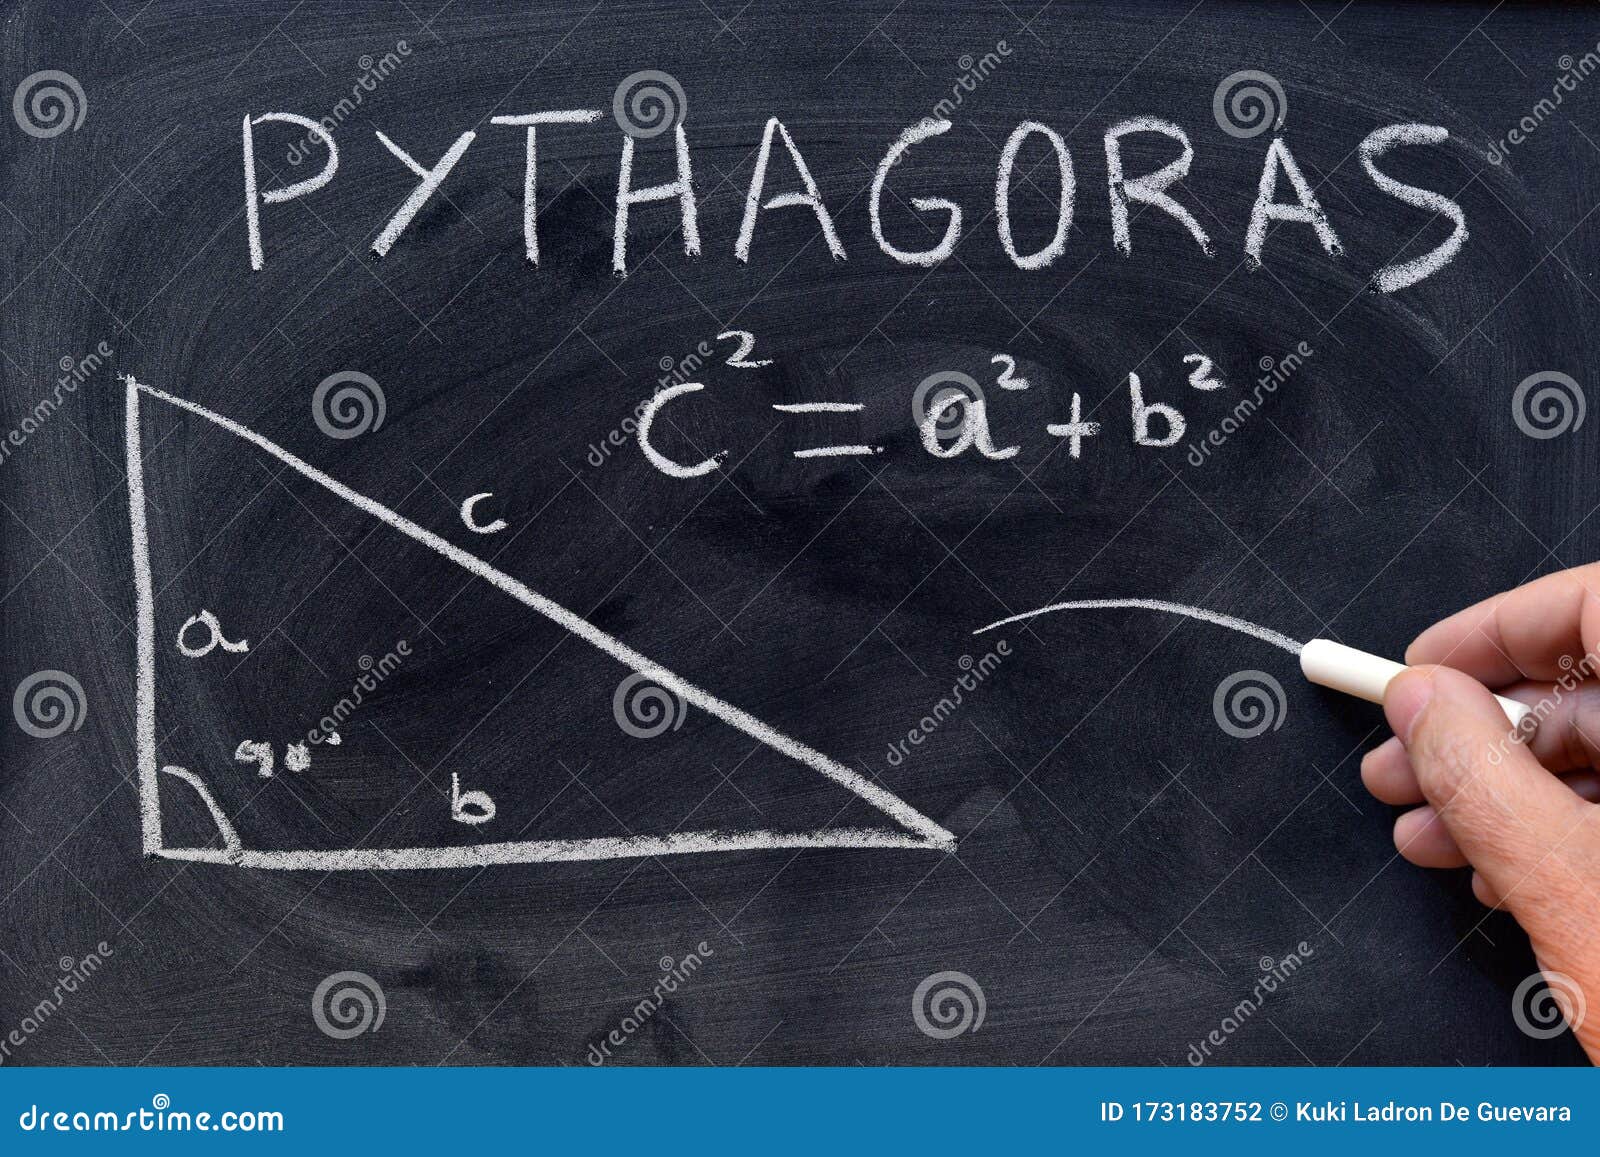 pythagorean theorem written with a chalk on the blackboard